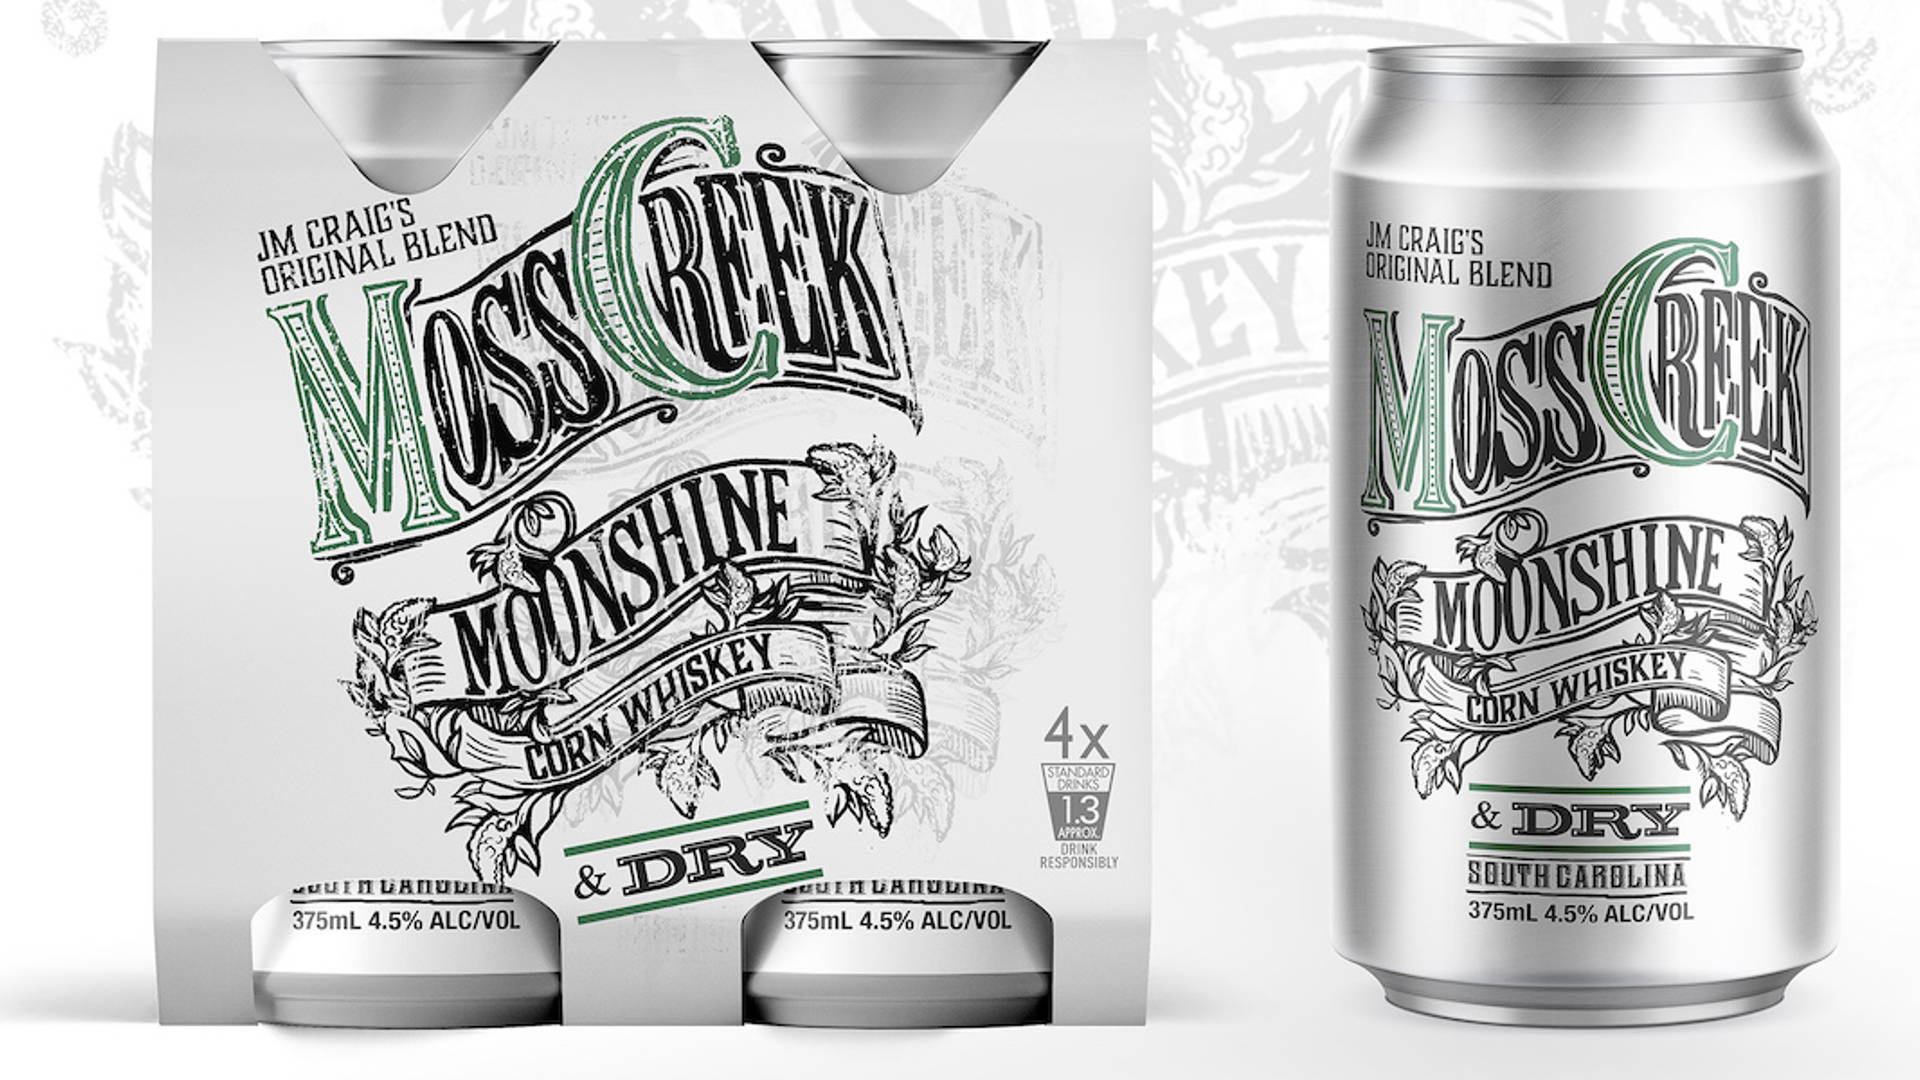 Featured image for Moss Creek Moonshine